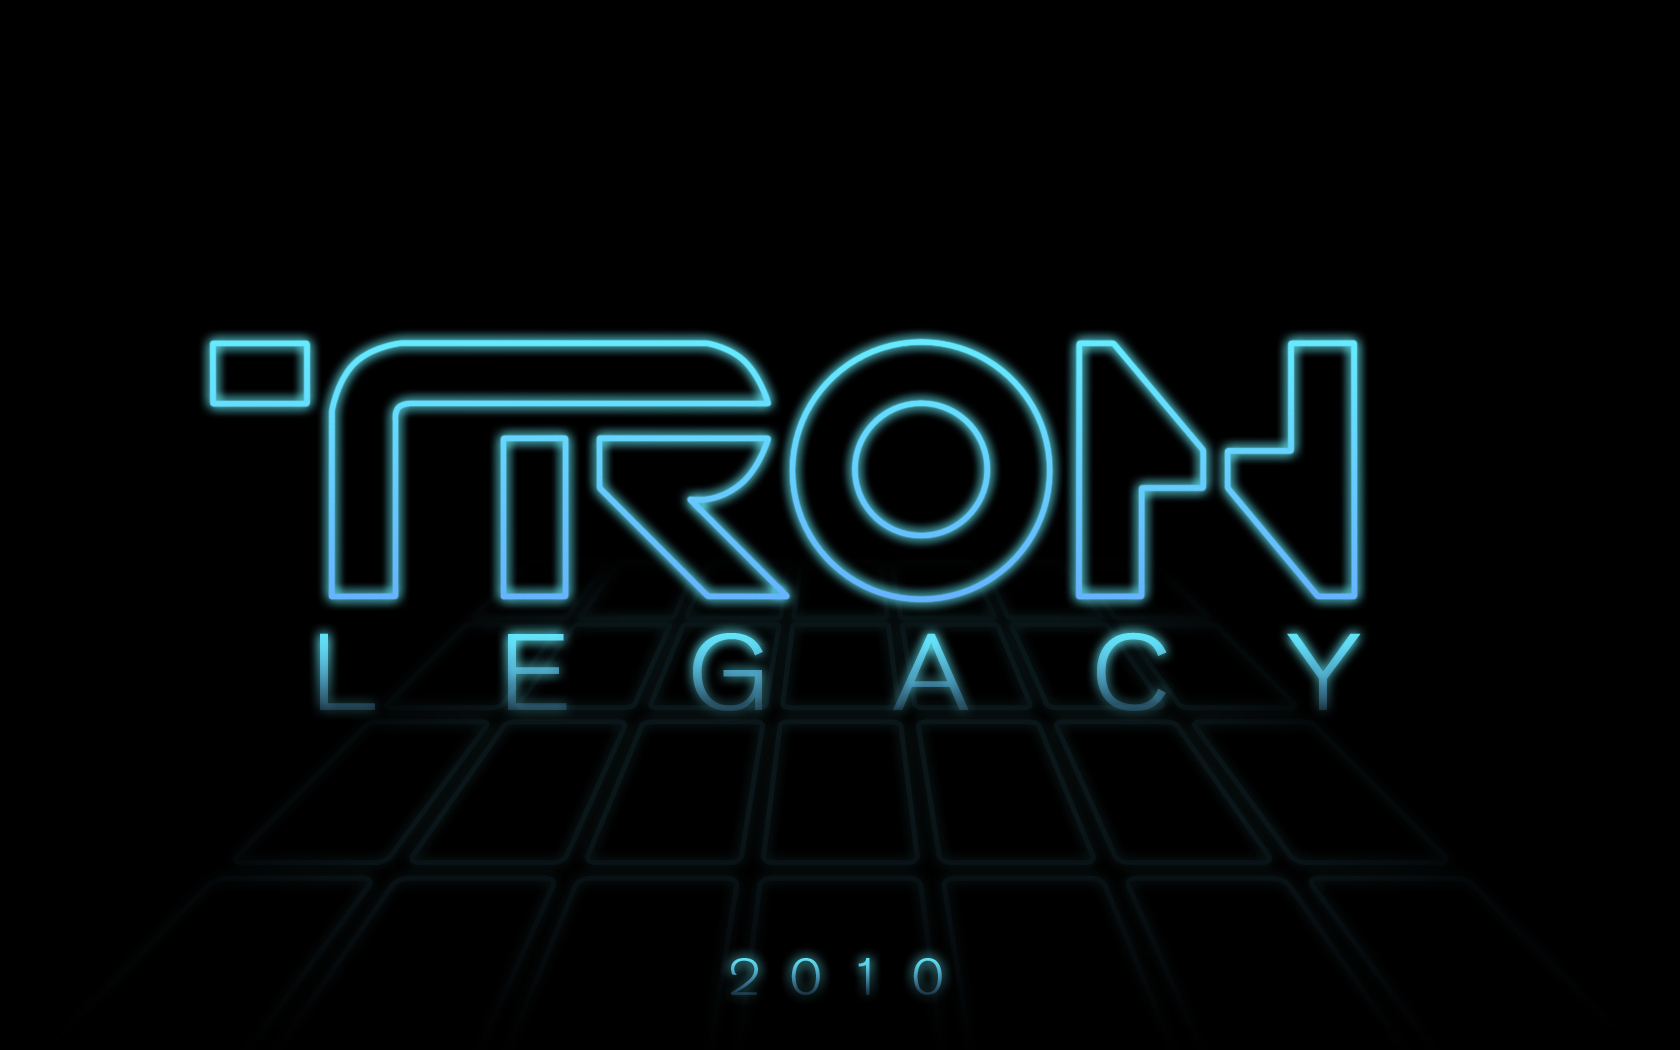 Tron Legacy Wallpapers Megapack Awesome Wallpapers